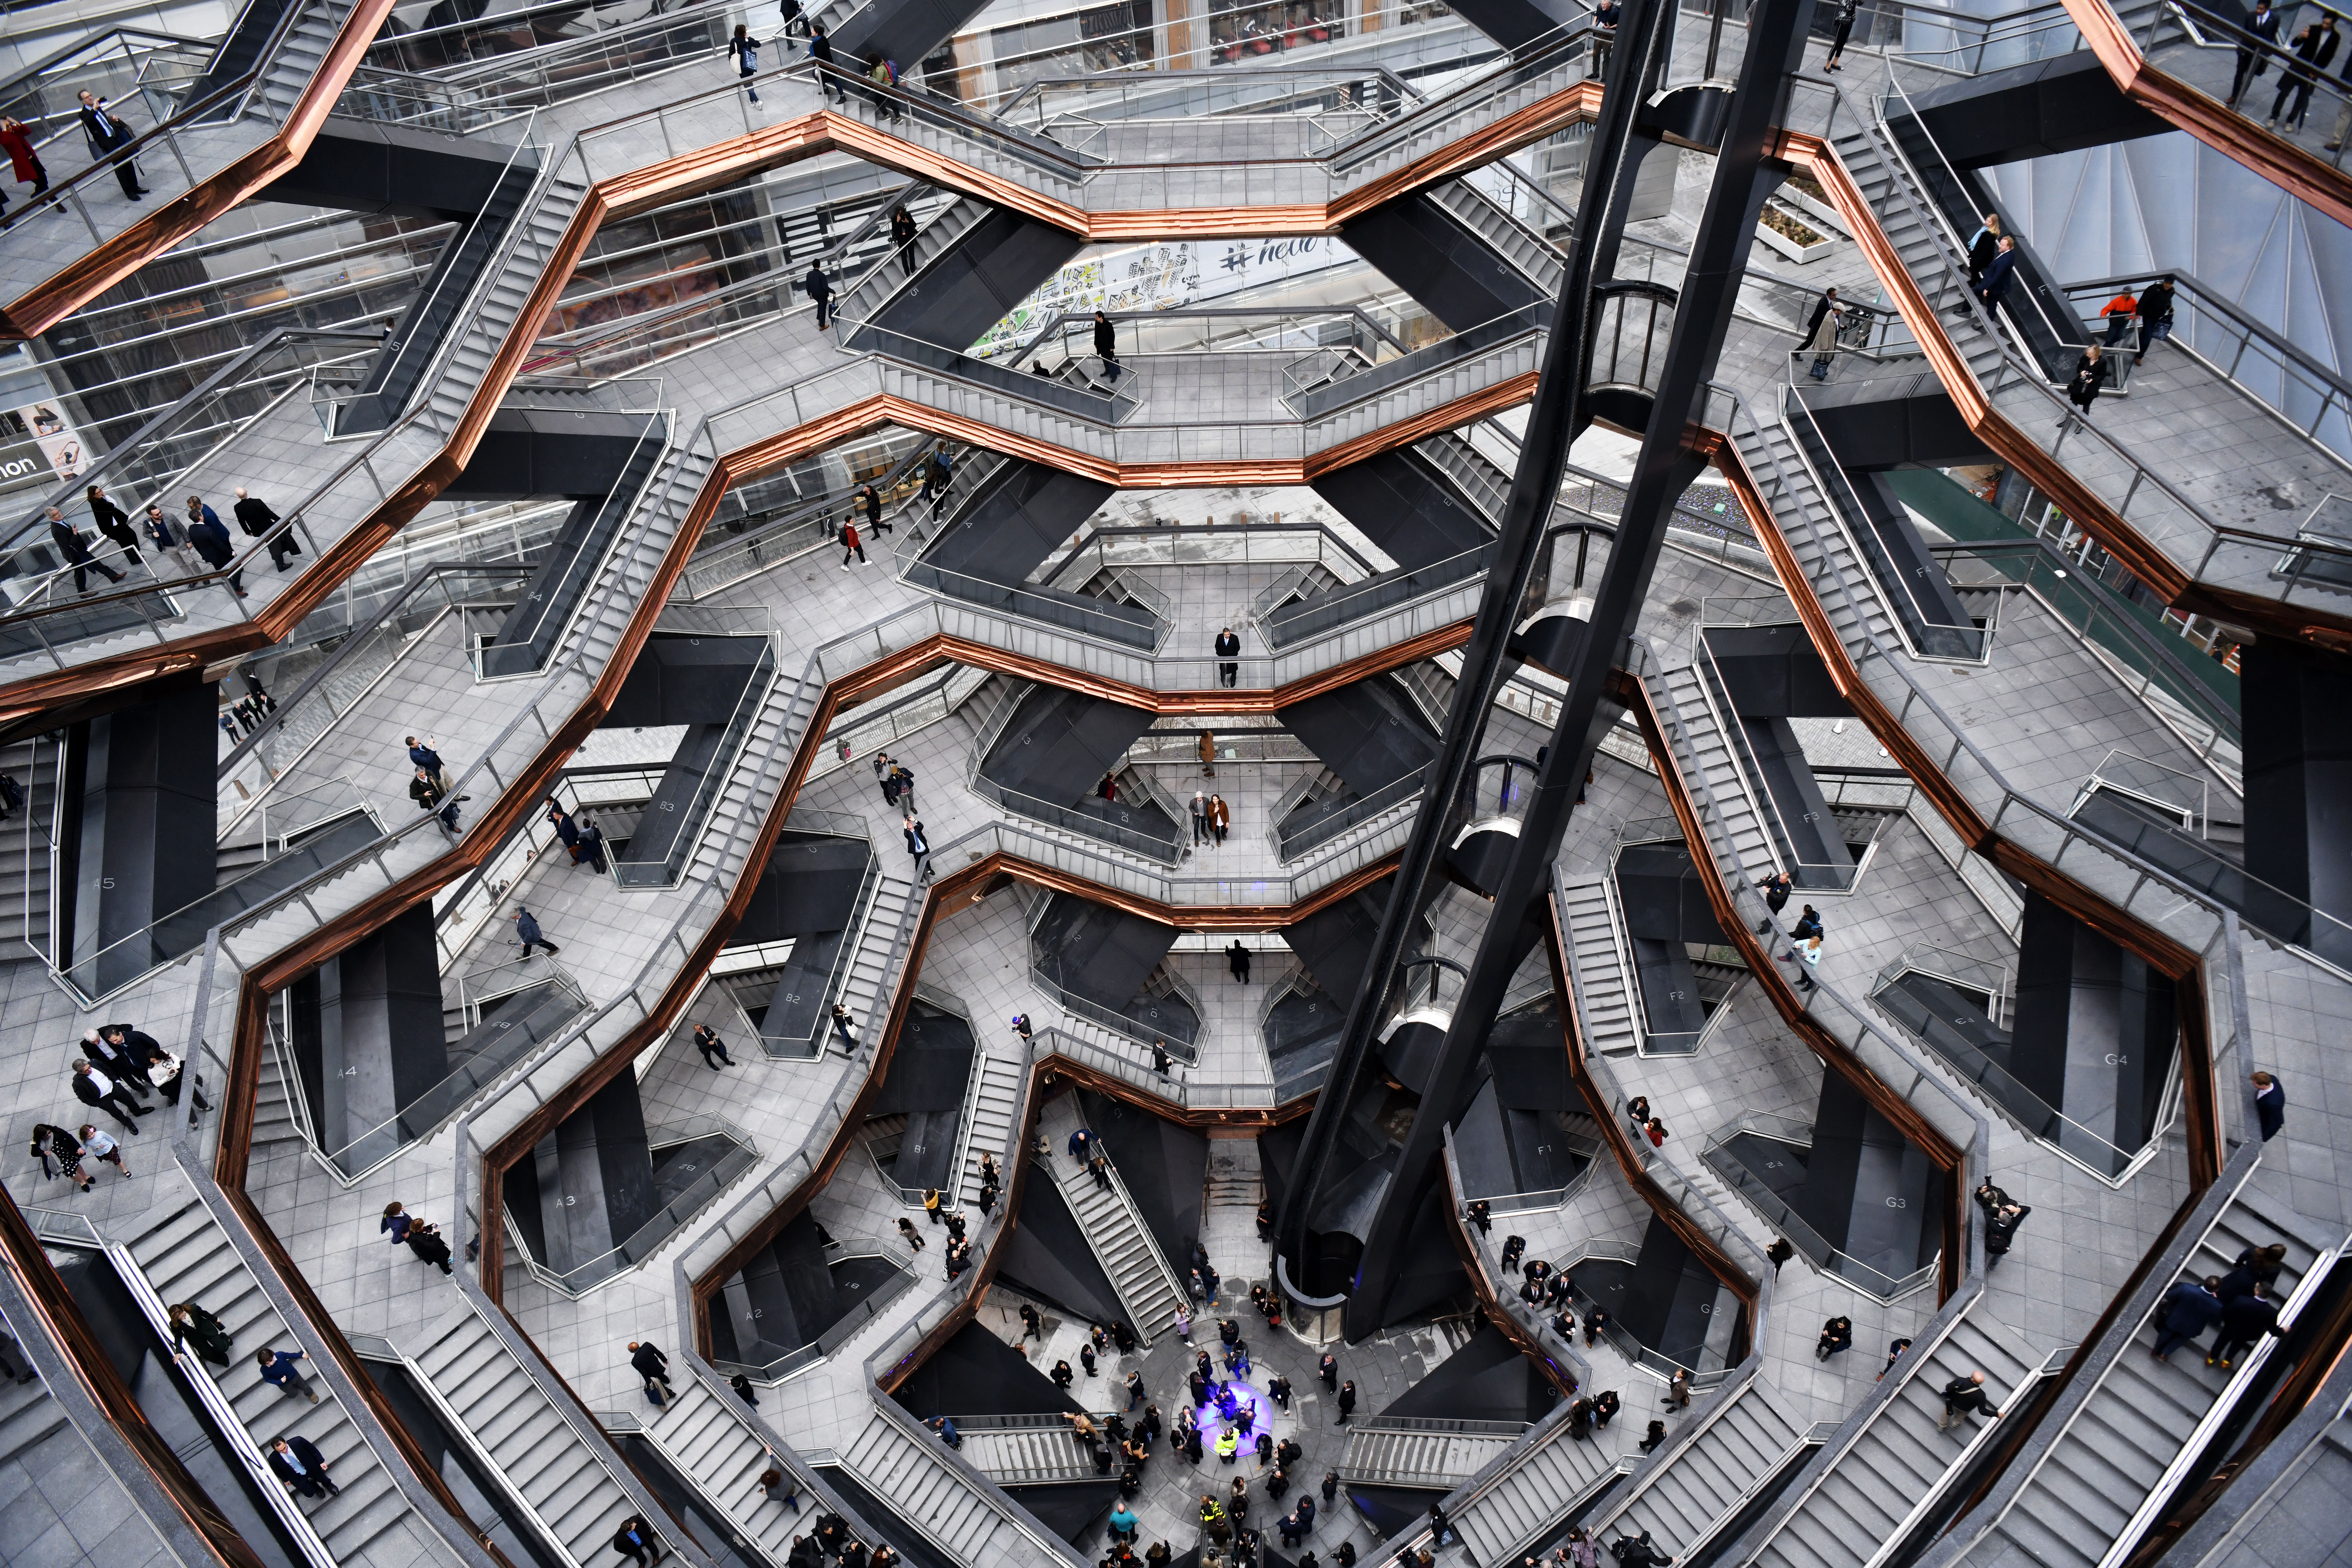 A view inside the Vessel at Hudson Yards, New York's newest neighbourhood